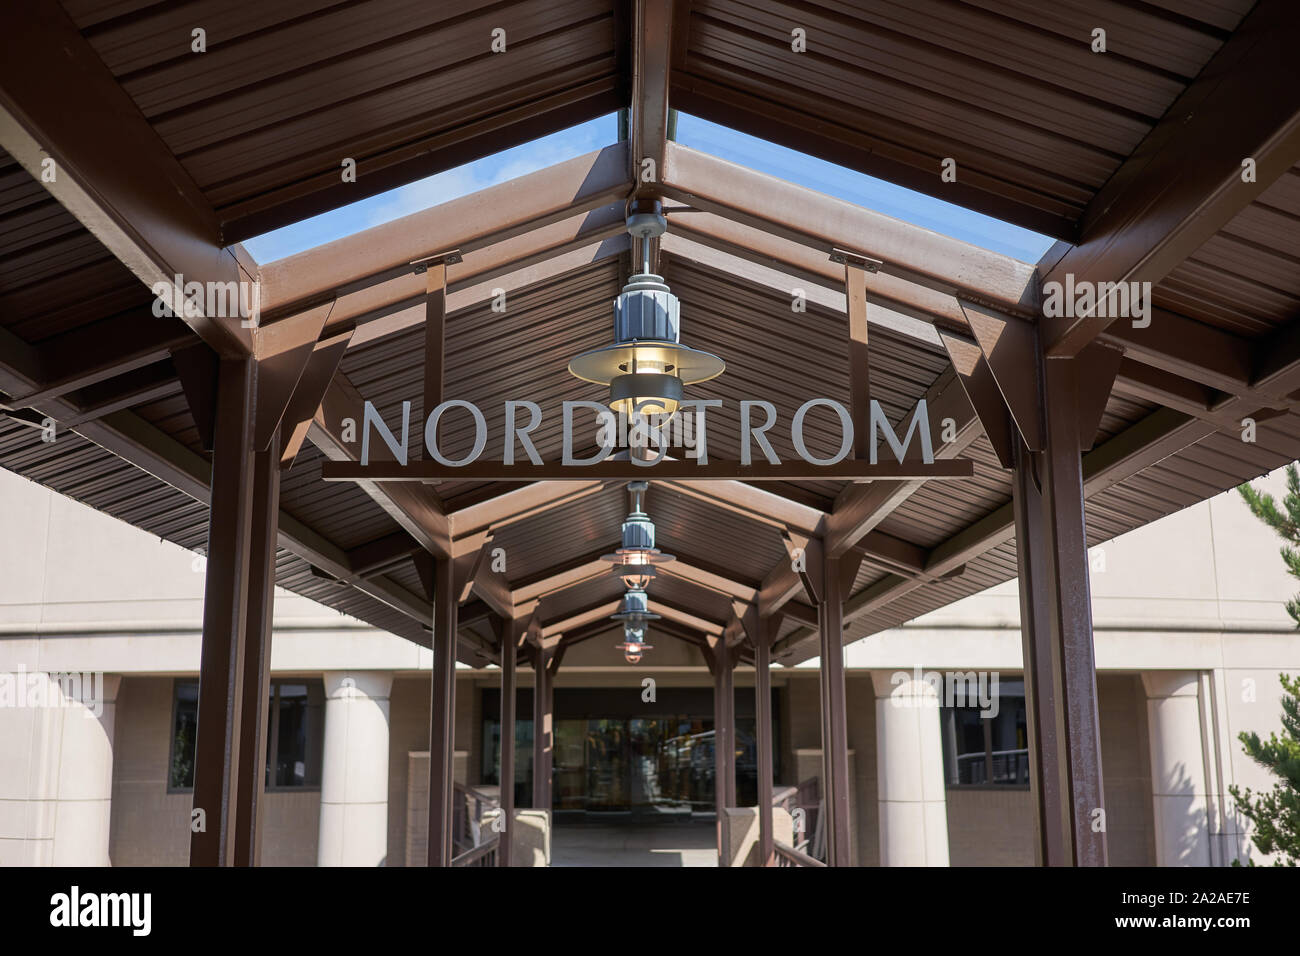 Tigard, Oregon, USA - Sep 16, 2019: The Nordstrom sign is seen at the entry to a Nordstrom department store in Tigard, Oregon. Stock Photo